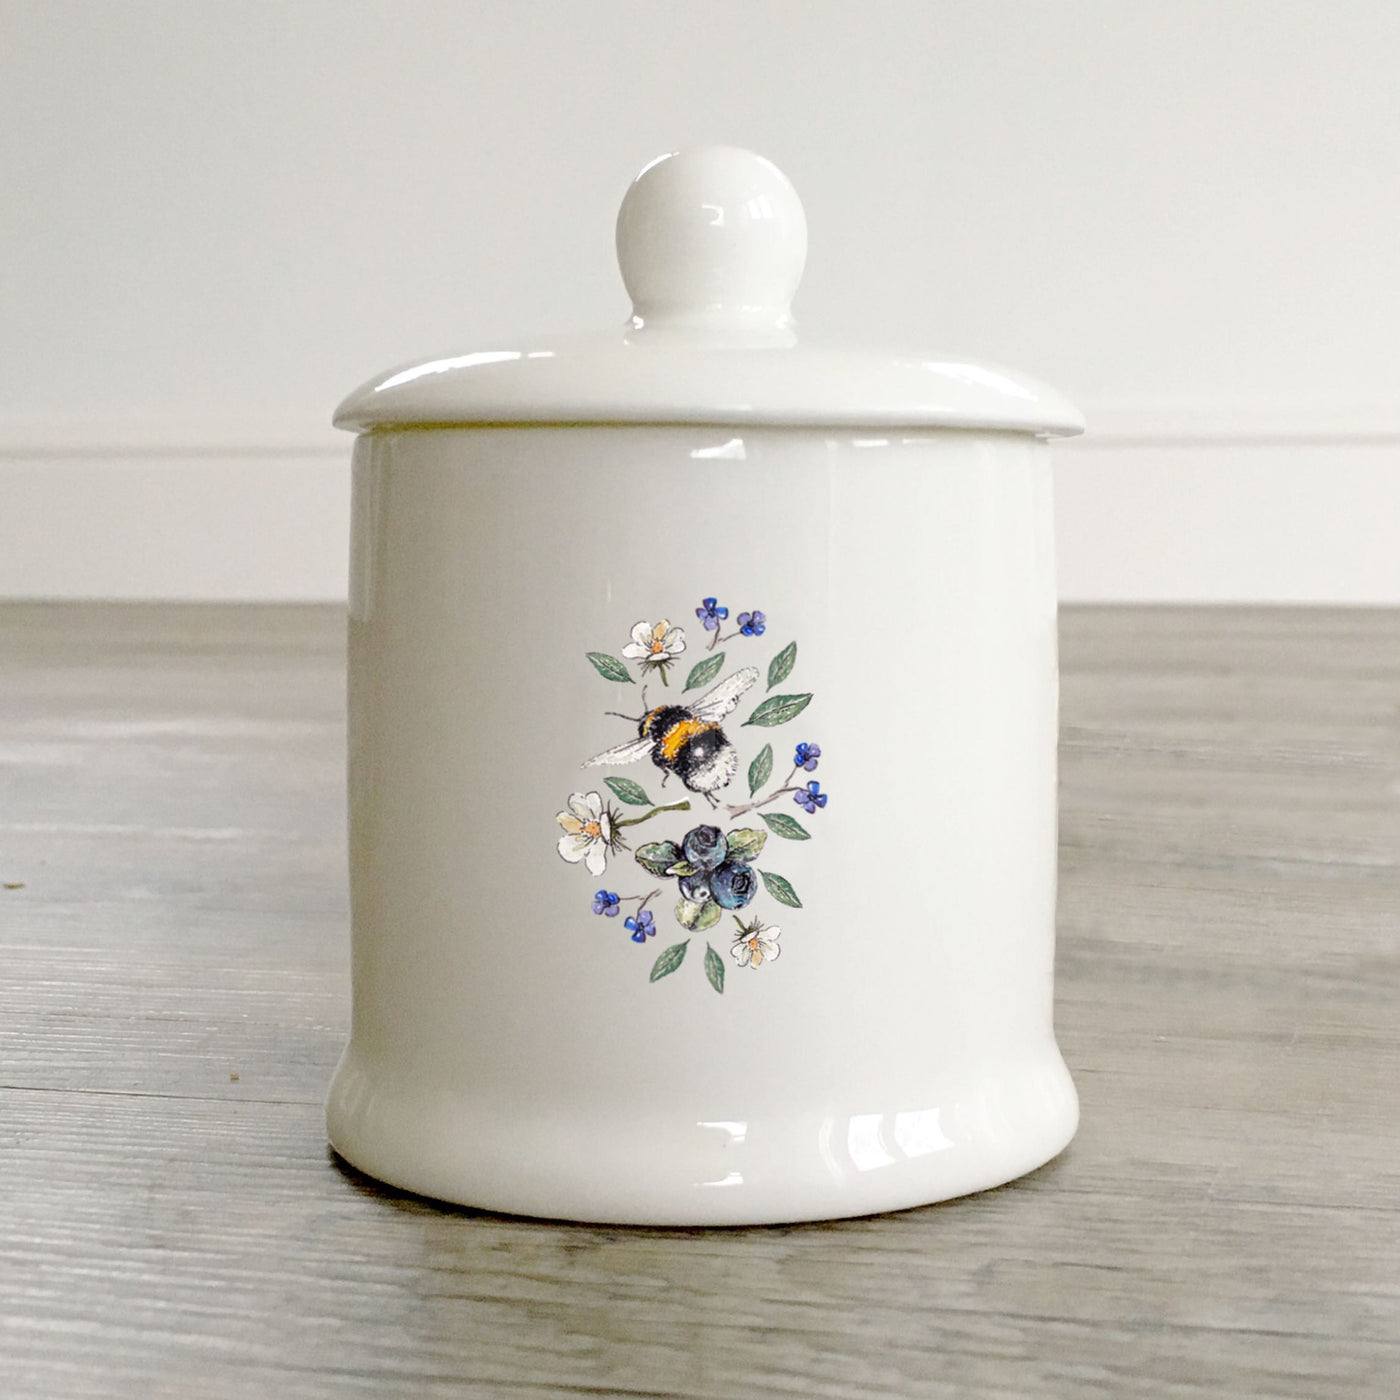 Toasted Crumpet Wild Flower Meadows Bee Boxed Lidded Sugar Pot